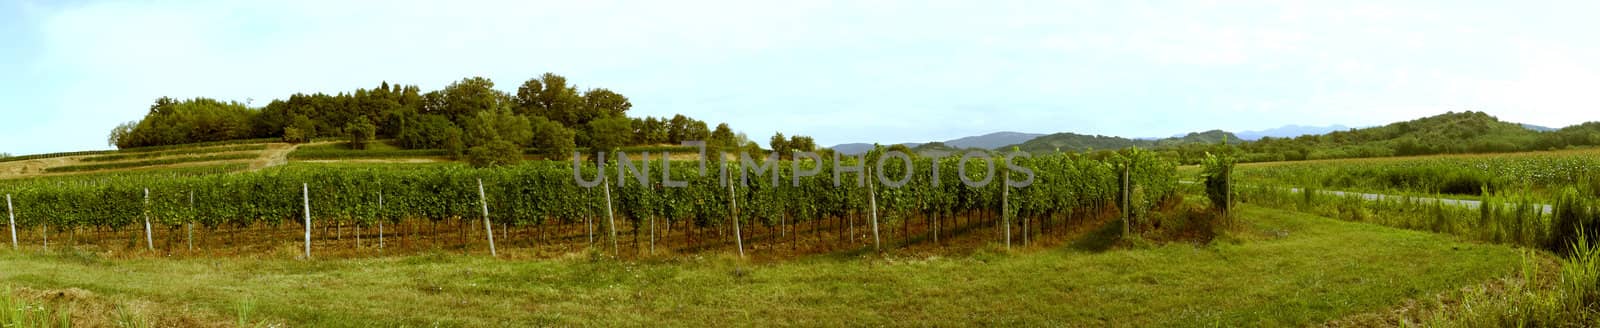 Vineyard panorama with hills on the background. Cornfield on the side.